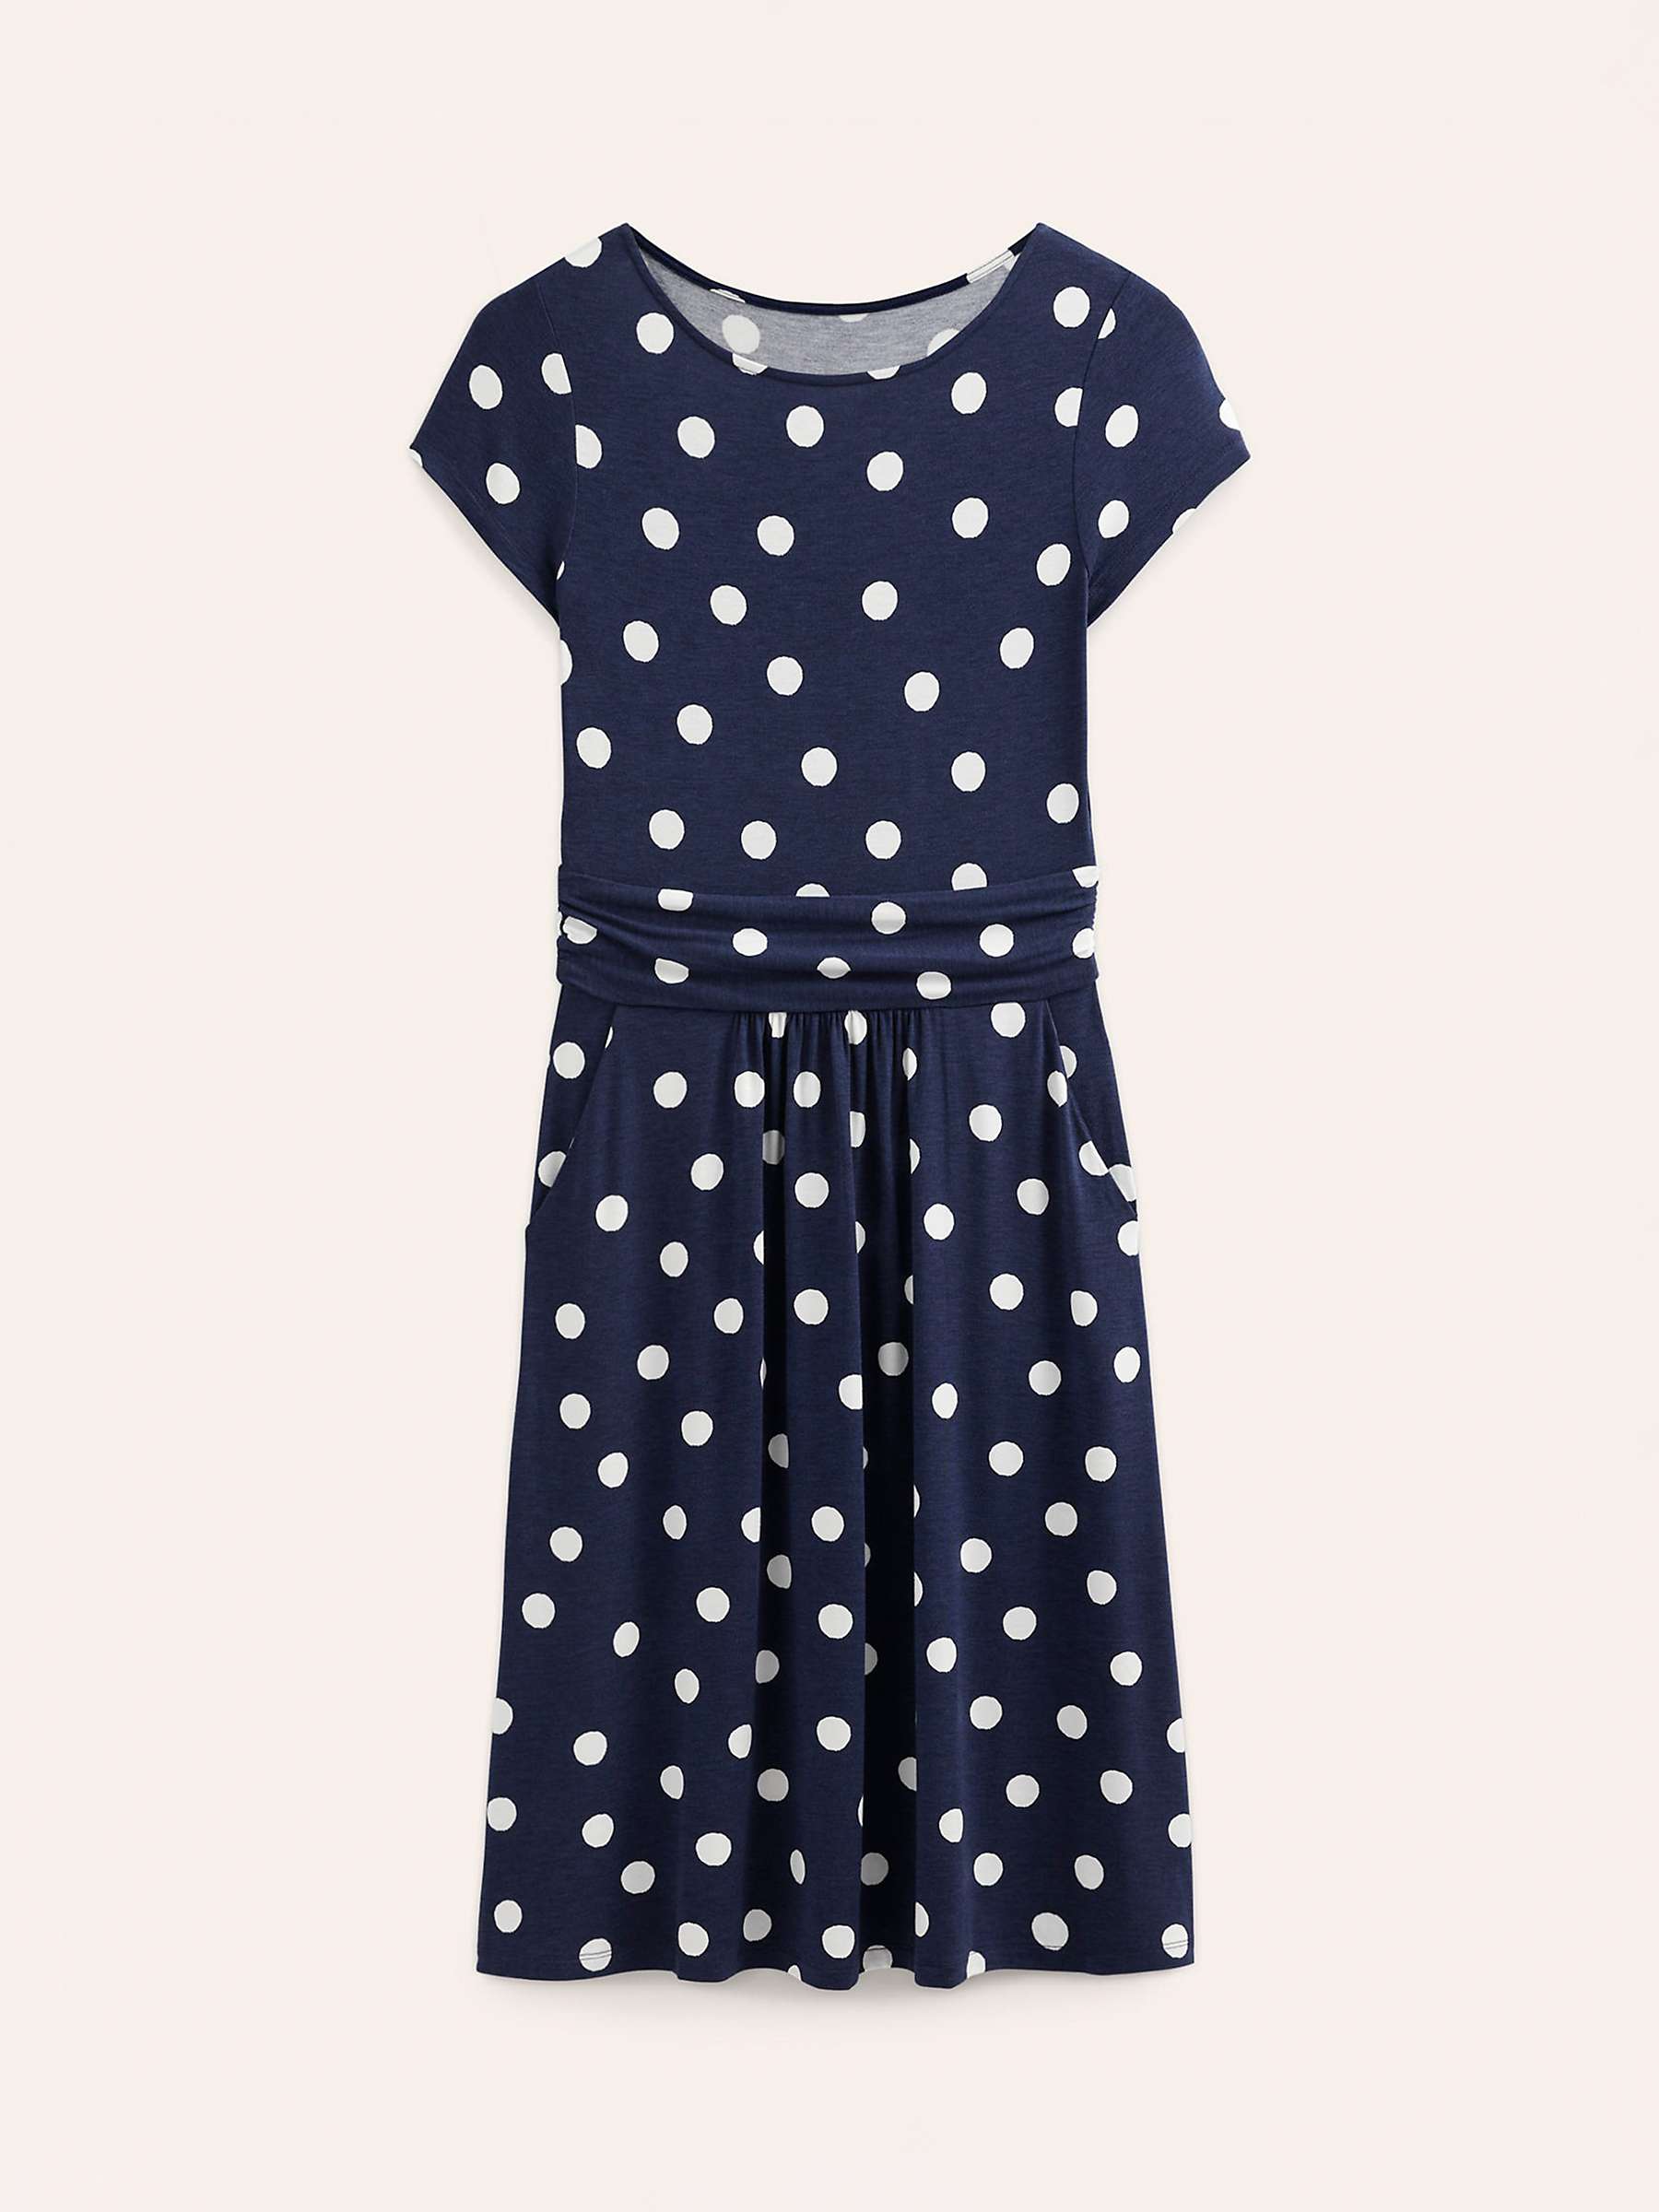 Buy Boden Amelie Jersey Painterly Spot Dress, Navy/White Online at johnlewis.com